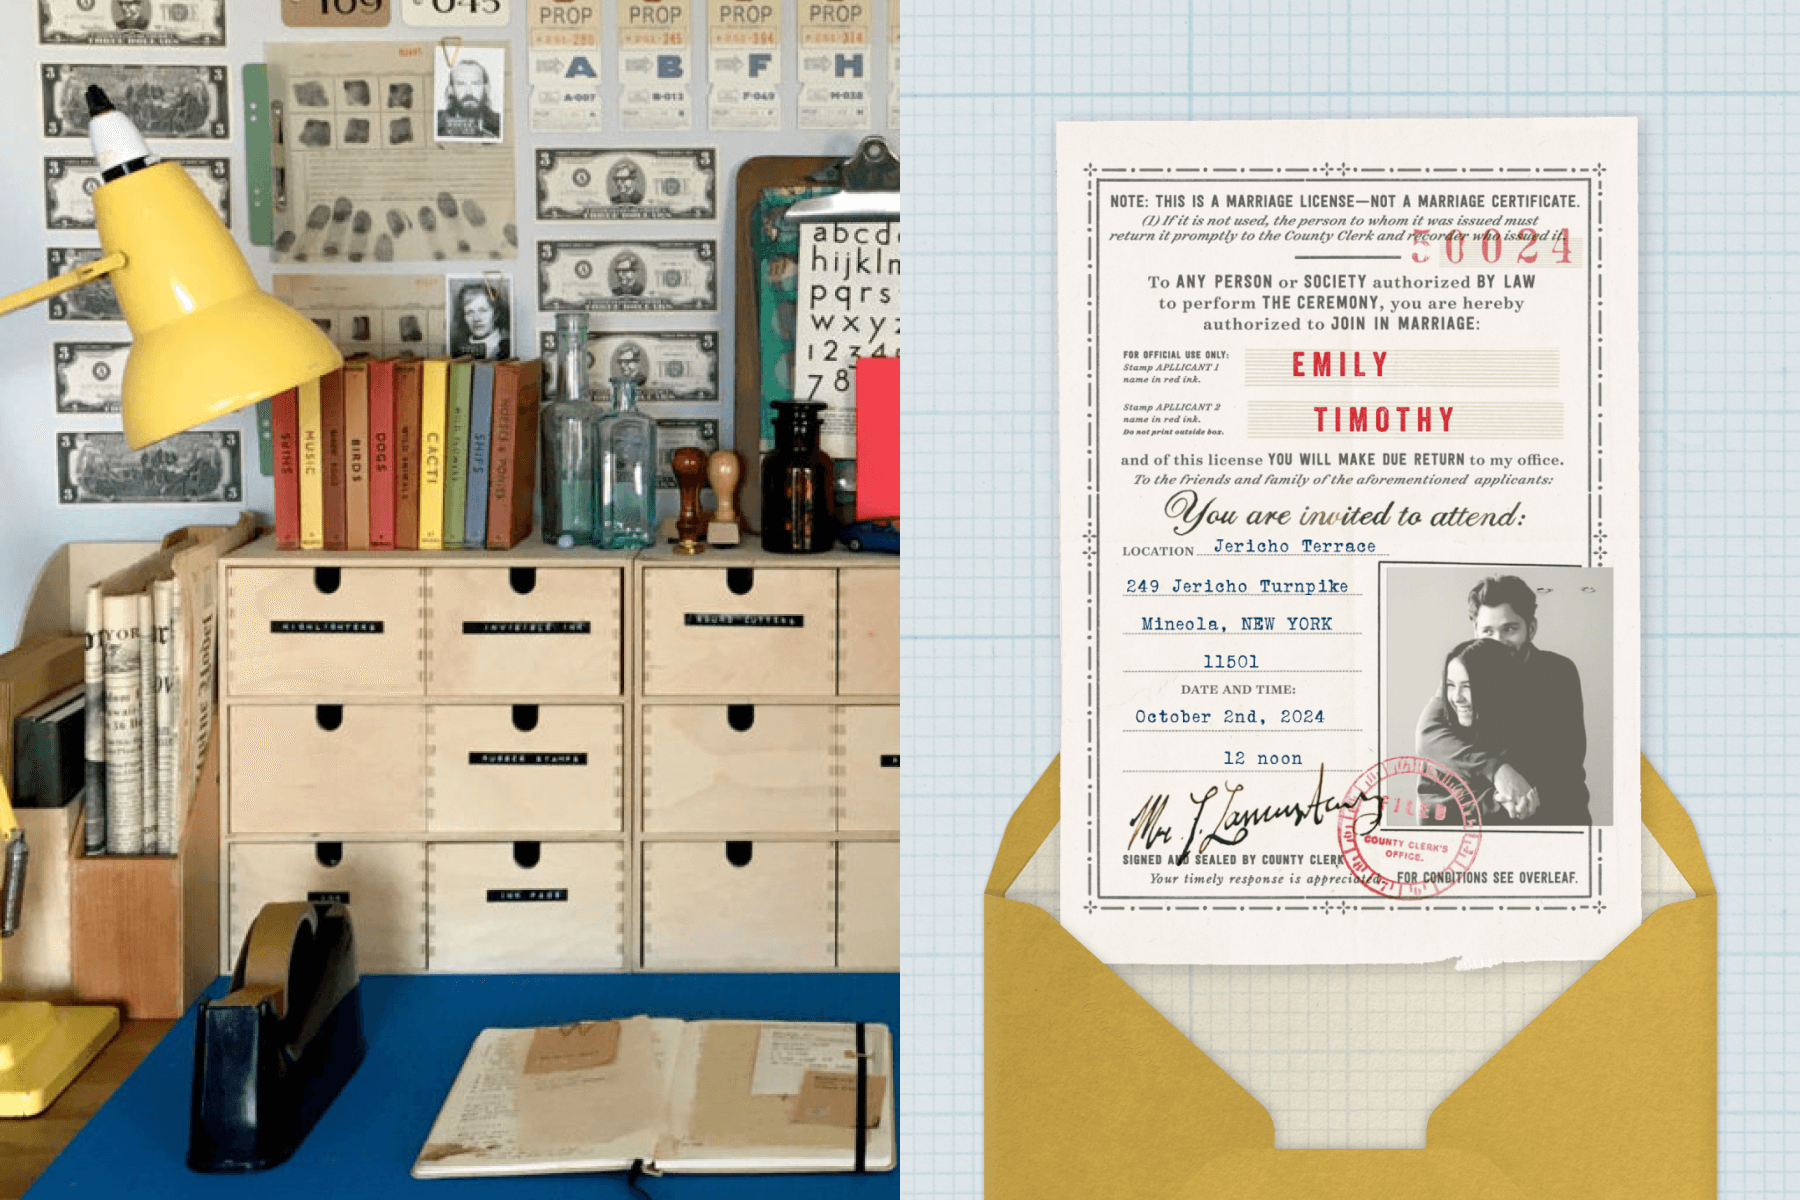 Left; a picture of Annie’s workroom with various props on the wall (money, finger print sheets, tags) and on top of the cabinets (books, glass bottles, stamps) in organized clutter. Right; A wedding invitation in the style of a vintage official document in front of a muted yellow envelope and a light blue gridded background.